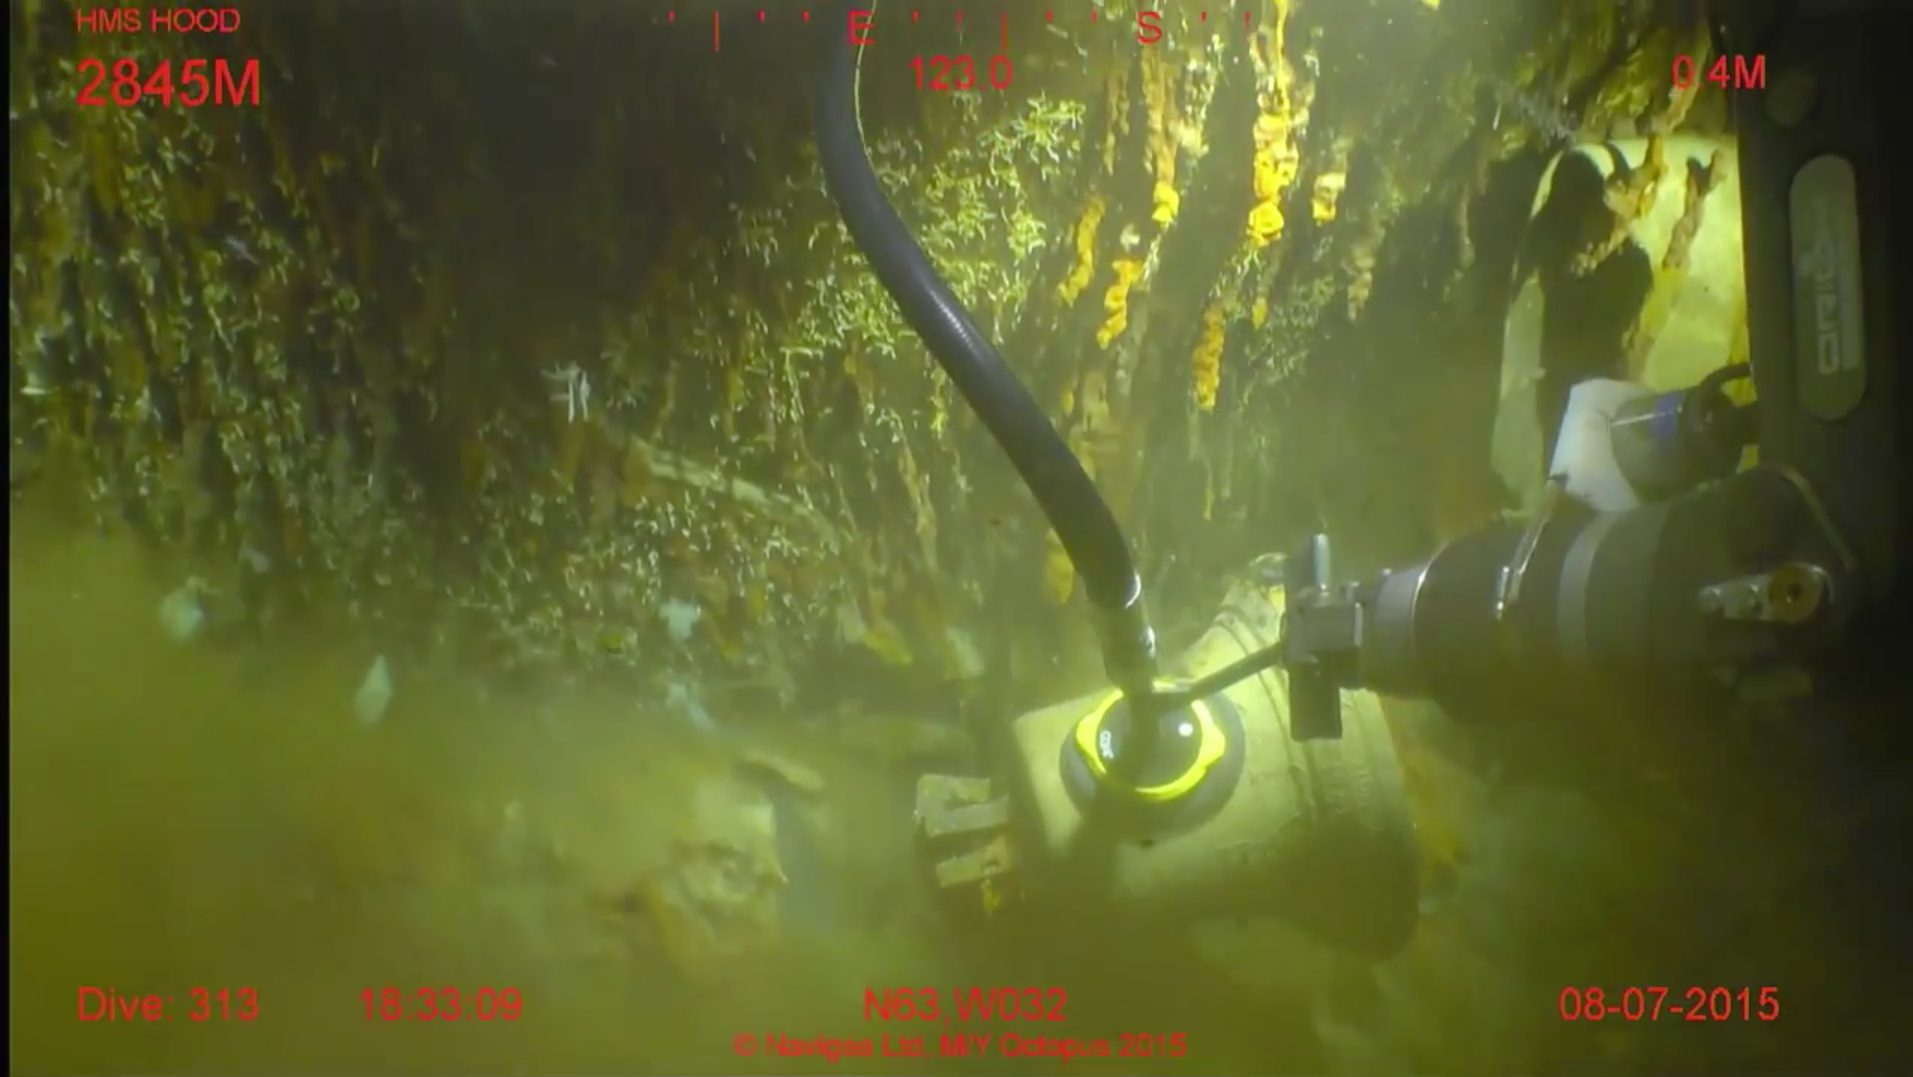 Screen grab of the ship's bell of HMS Hood plucked from the ocean floor on Aug 7, 2015. 